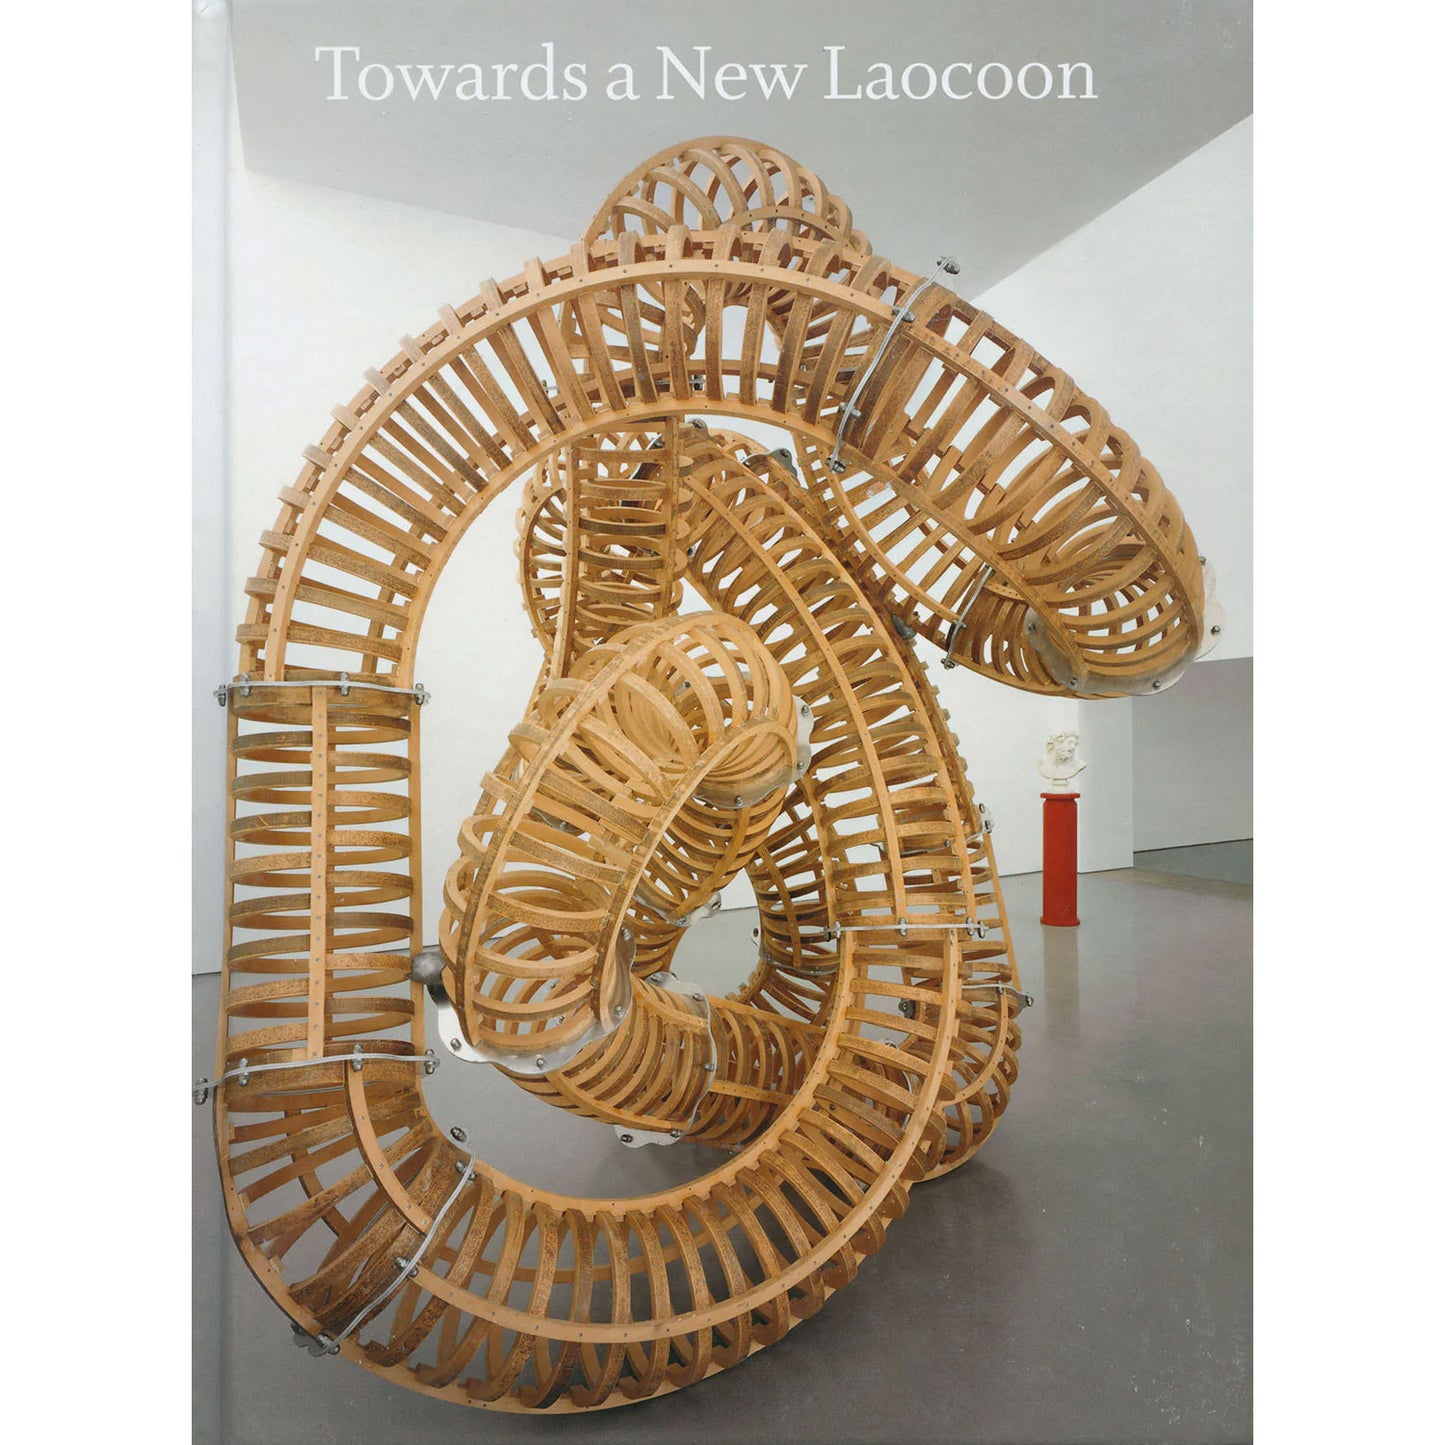 Towards a New Laocoon